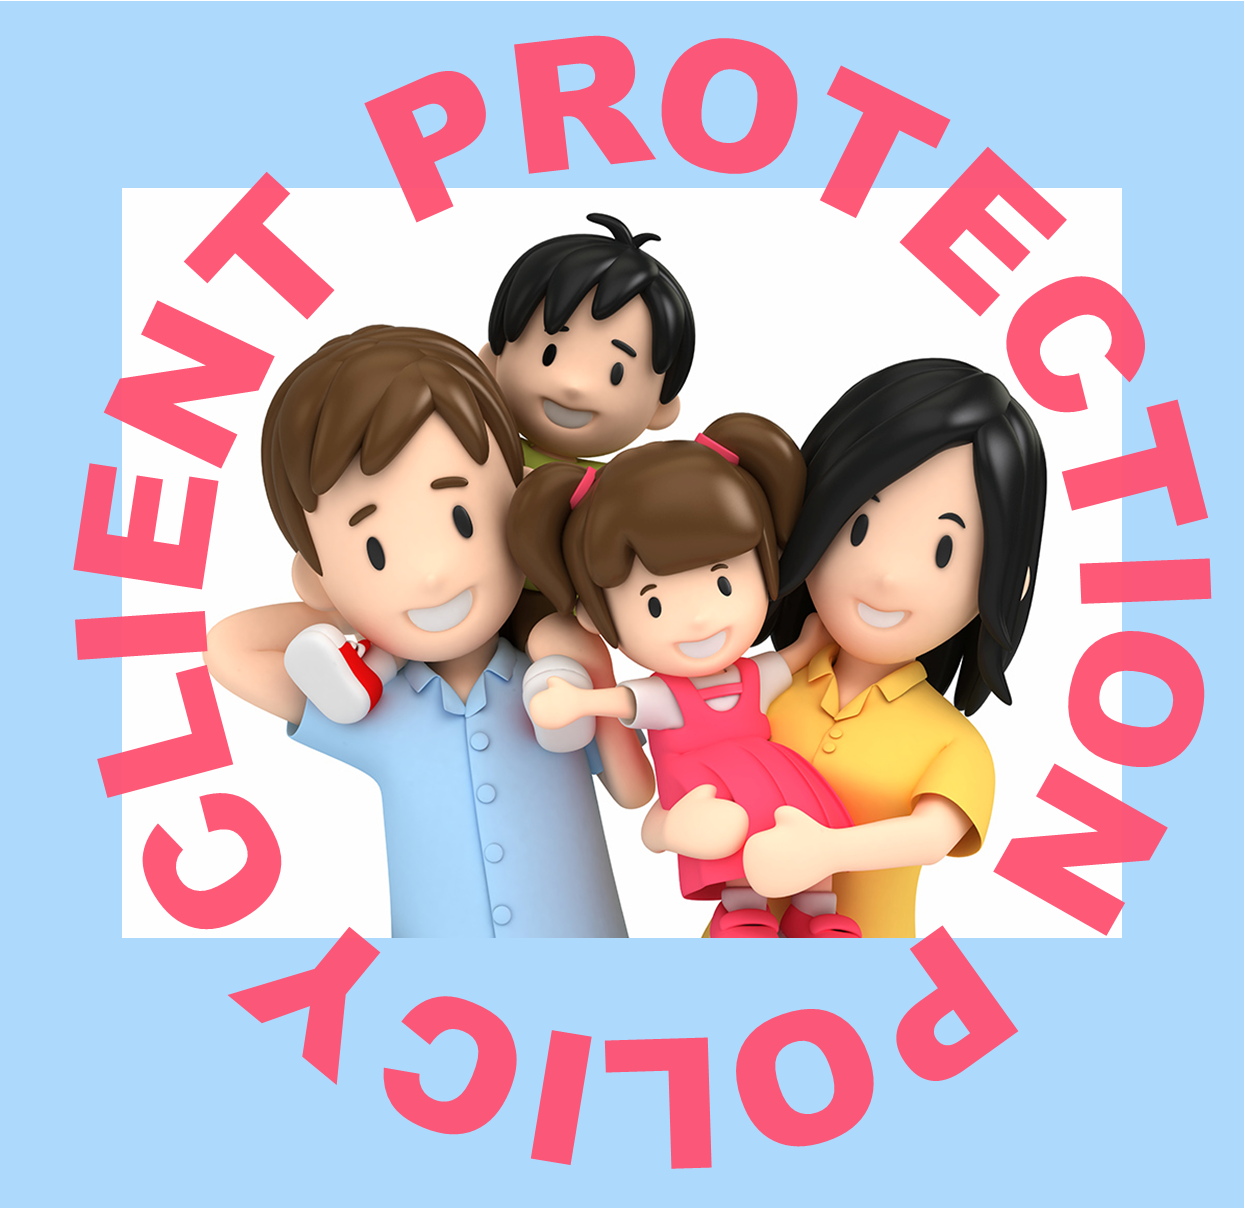 Client Protection Policy